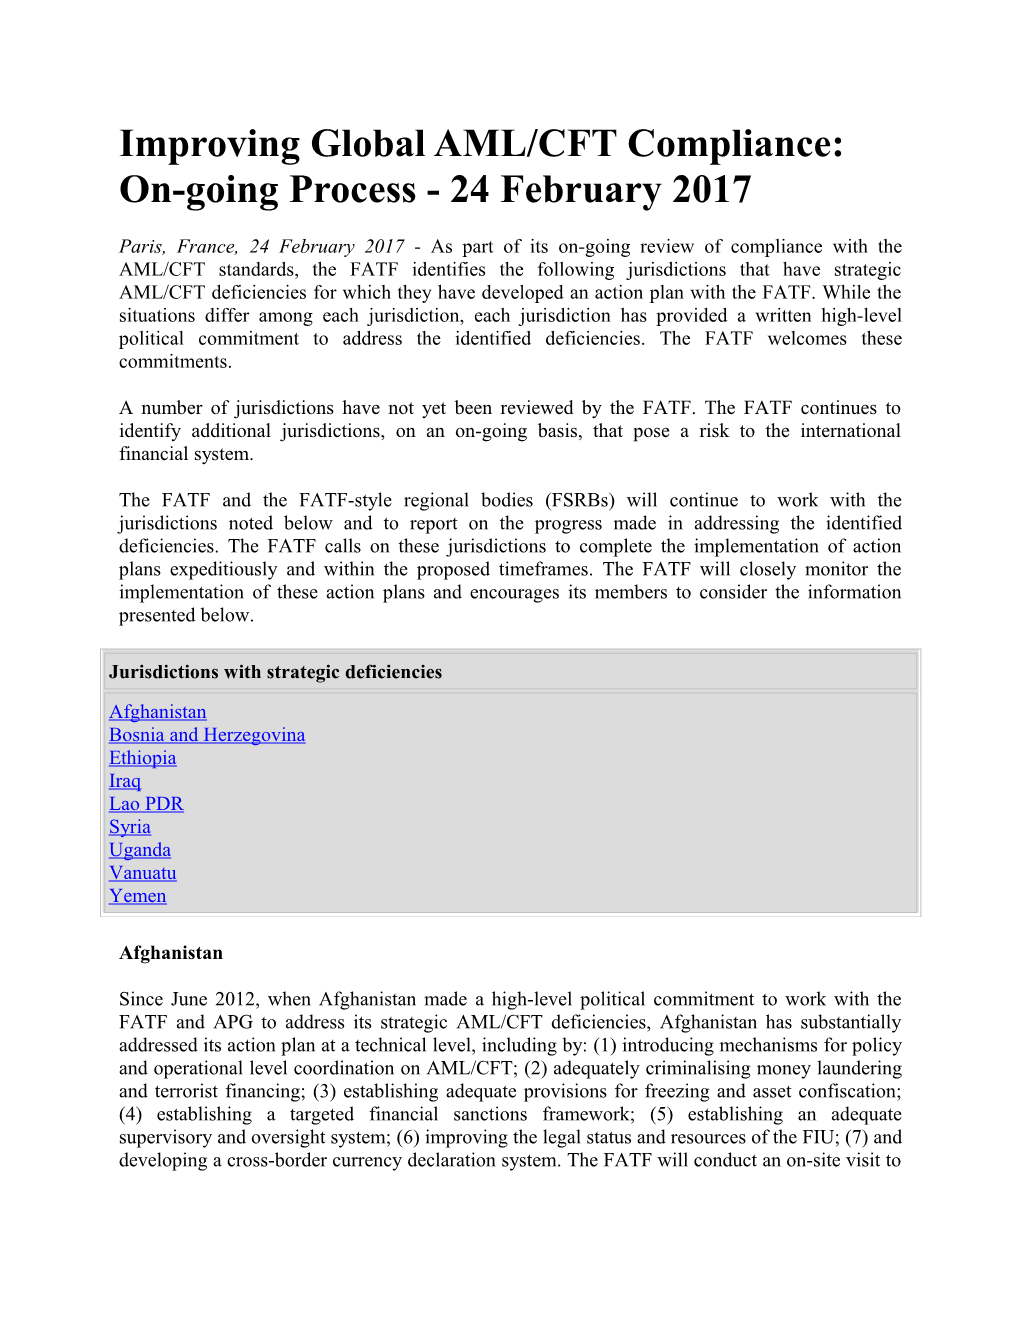 Improving Global AML/CFT Compliance: On-Going Process - 24 February 2017